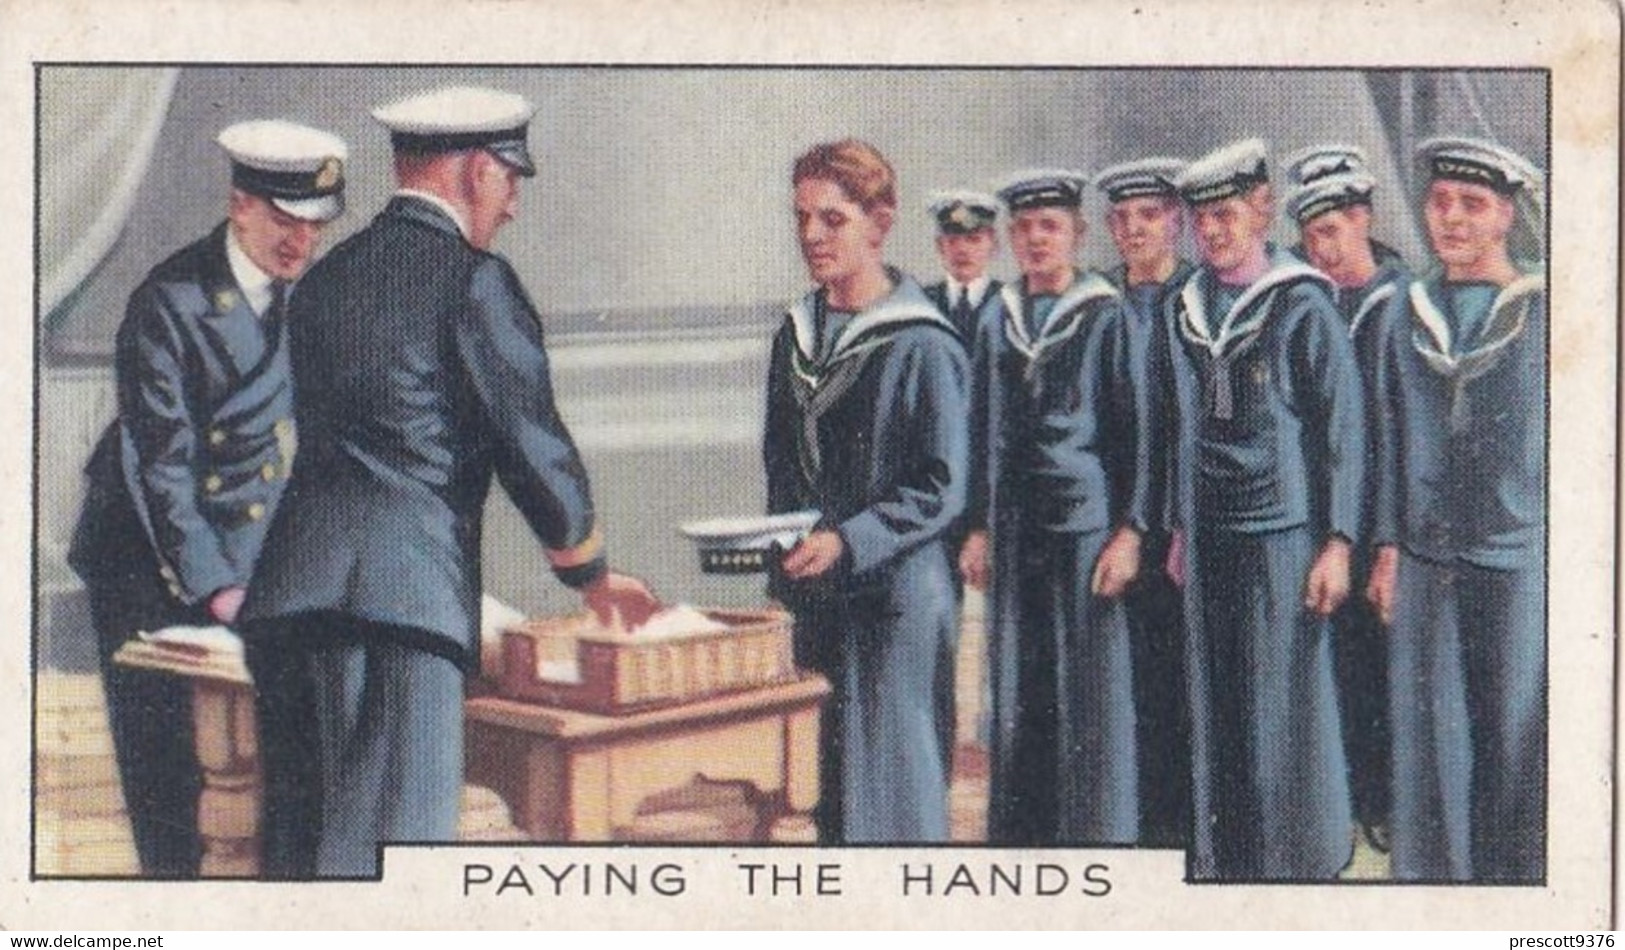 The Navy 1937 - 37 Paying The Hands  - Gallaher Cigarette Card - Original - Military - Gallaher